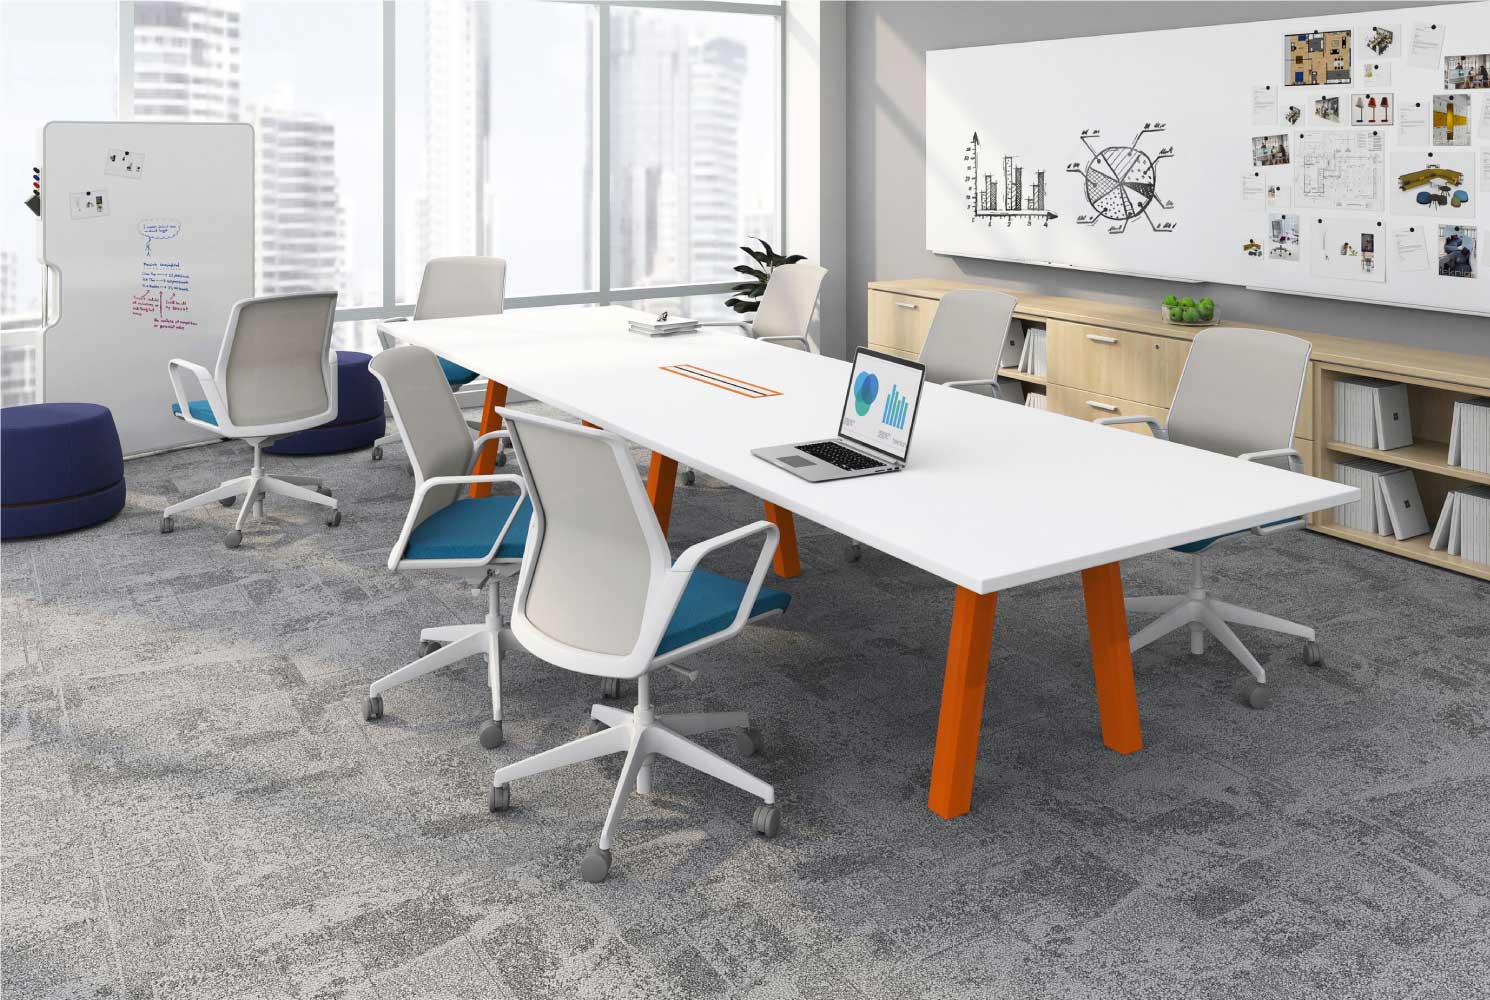 Meeting & Workspace featuring Teknion Expansion